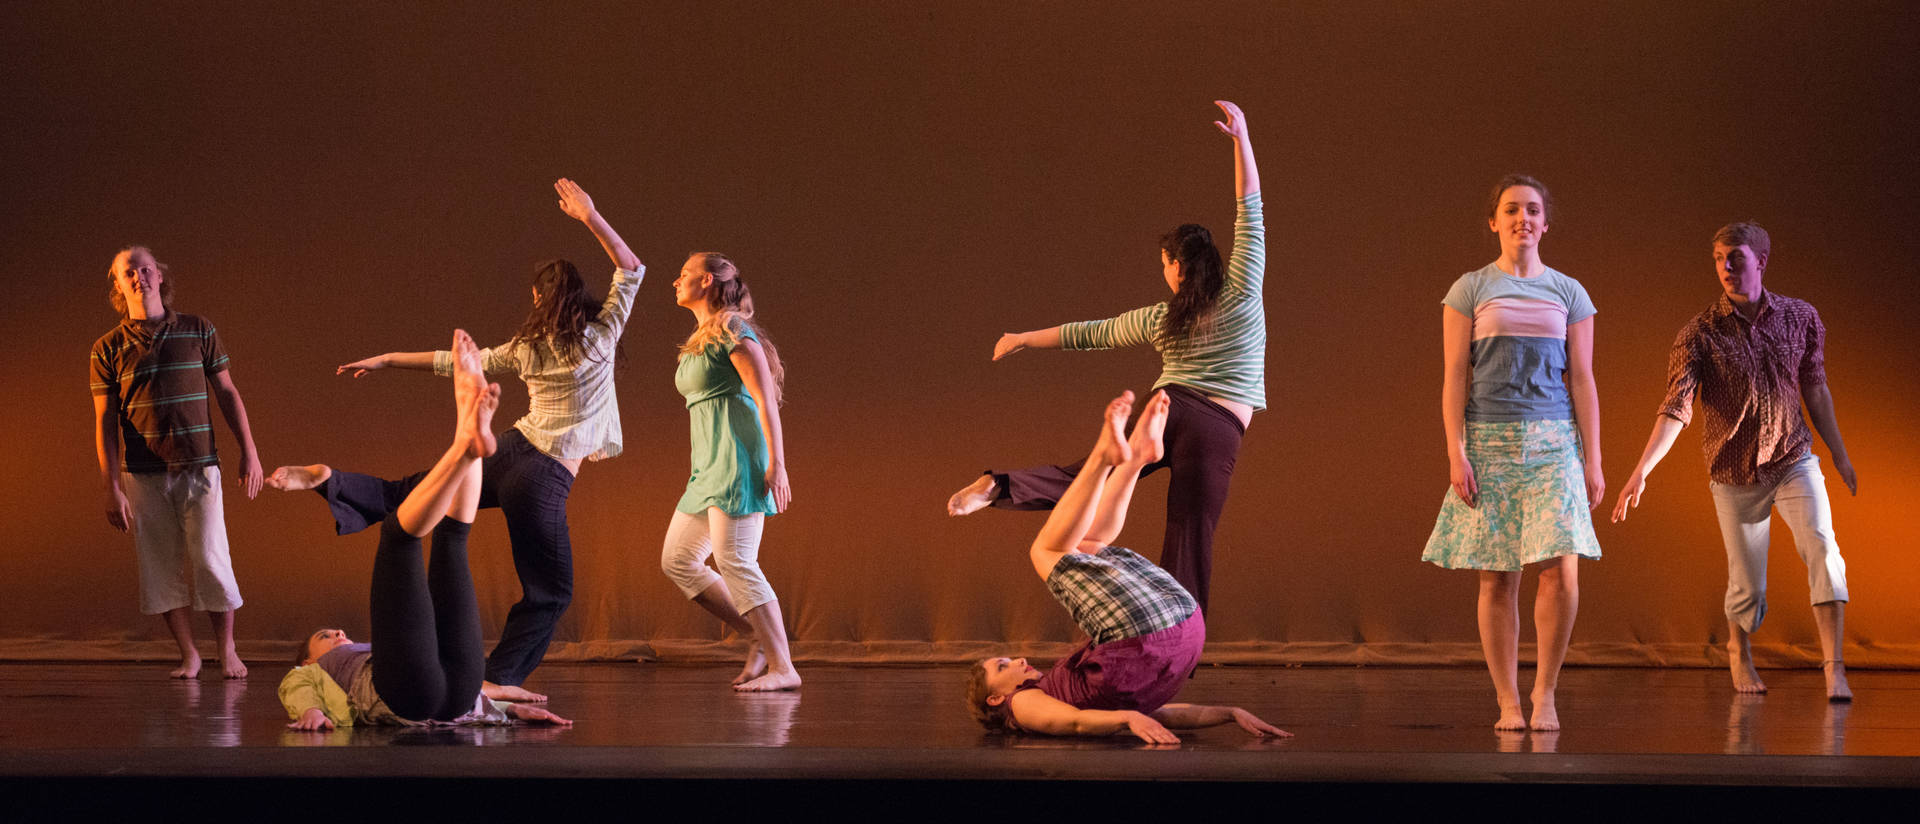 Dance students rehearsing on stage